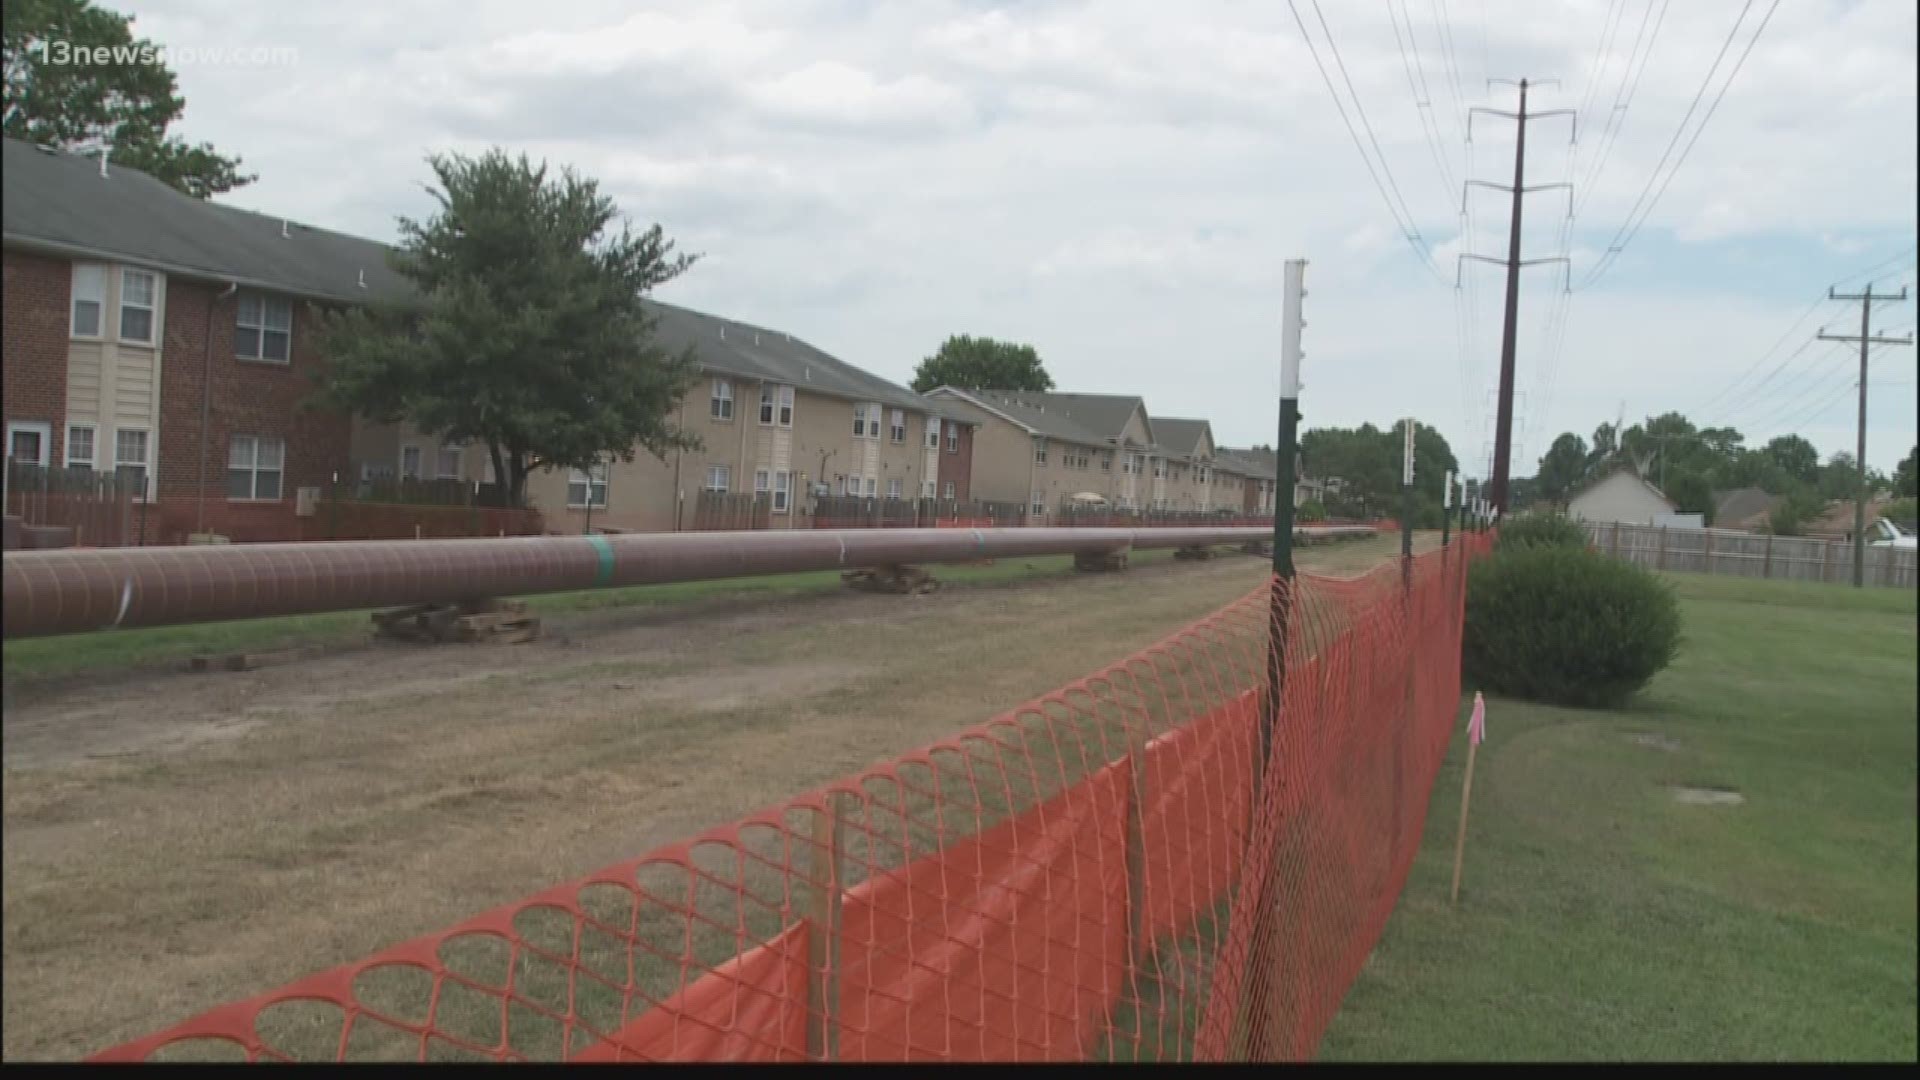 An expert is weighing in on the potential dangers a gas pipeline could cause.